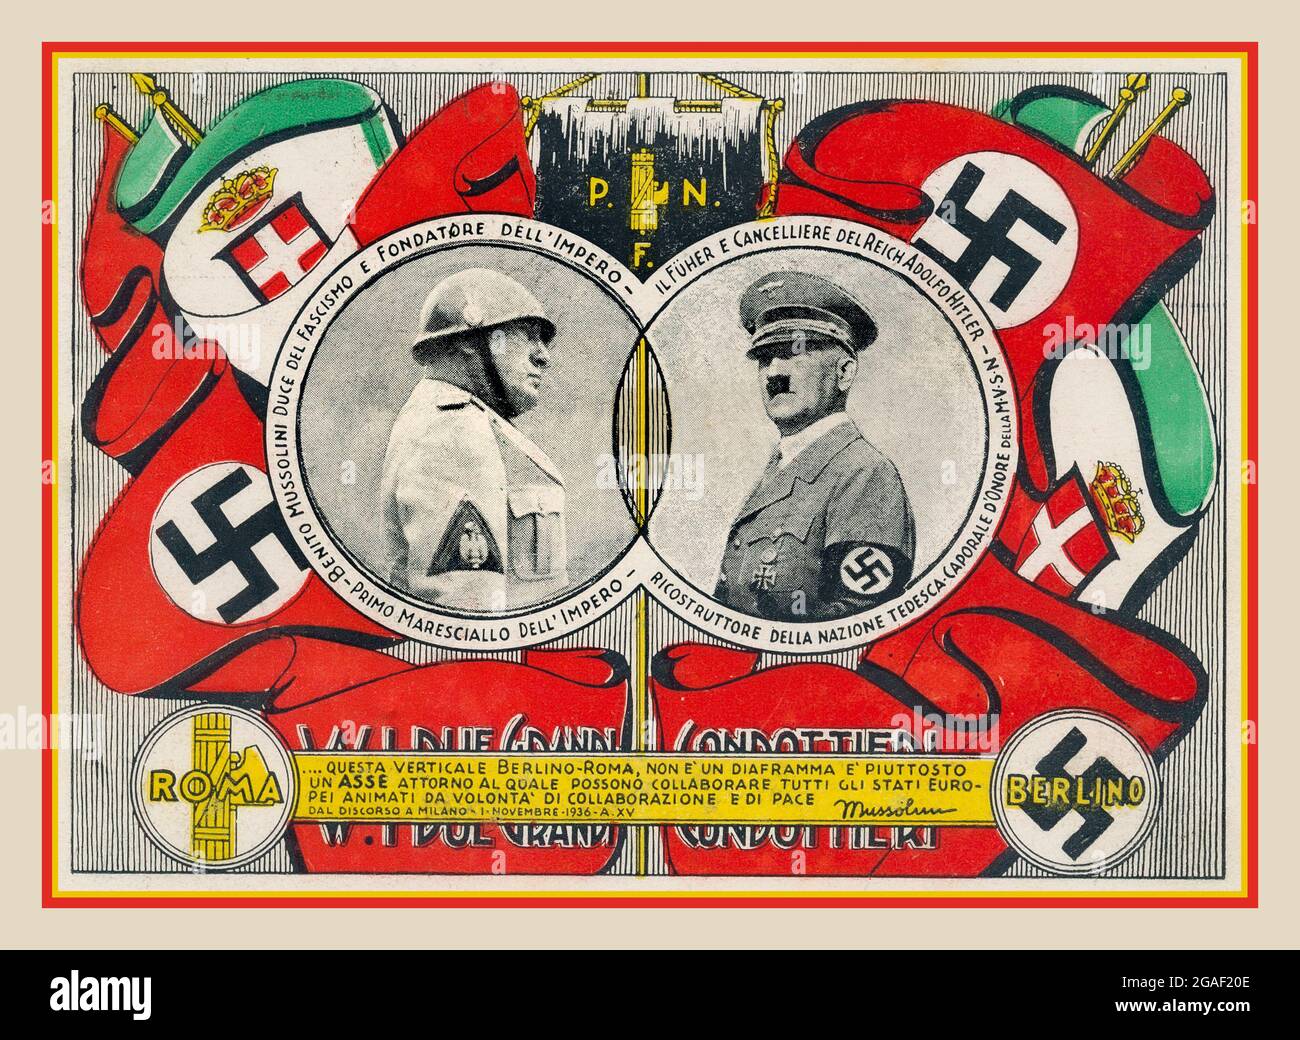 HITLER MUSSOLINI 1936, Italian Facist Propaganda Poster Card promoting the close collaboration between Adolf Hitler Nazi Party Germany and El Duce Benito Mussolini Facist Party Italy. Part of the WW2 Axis of Evil Stock Photo